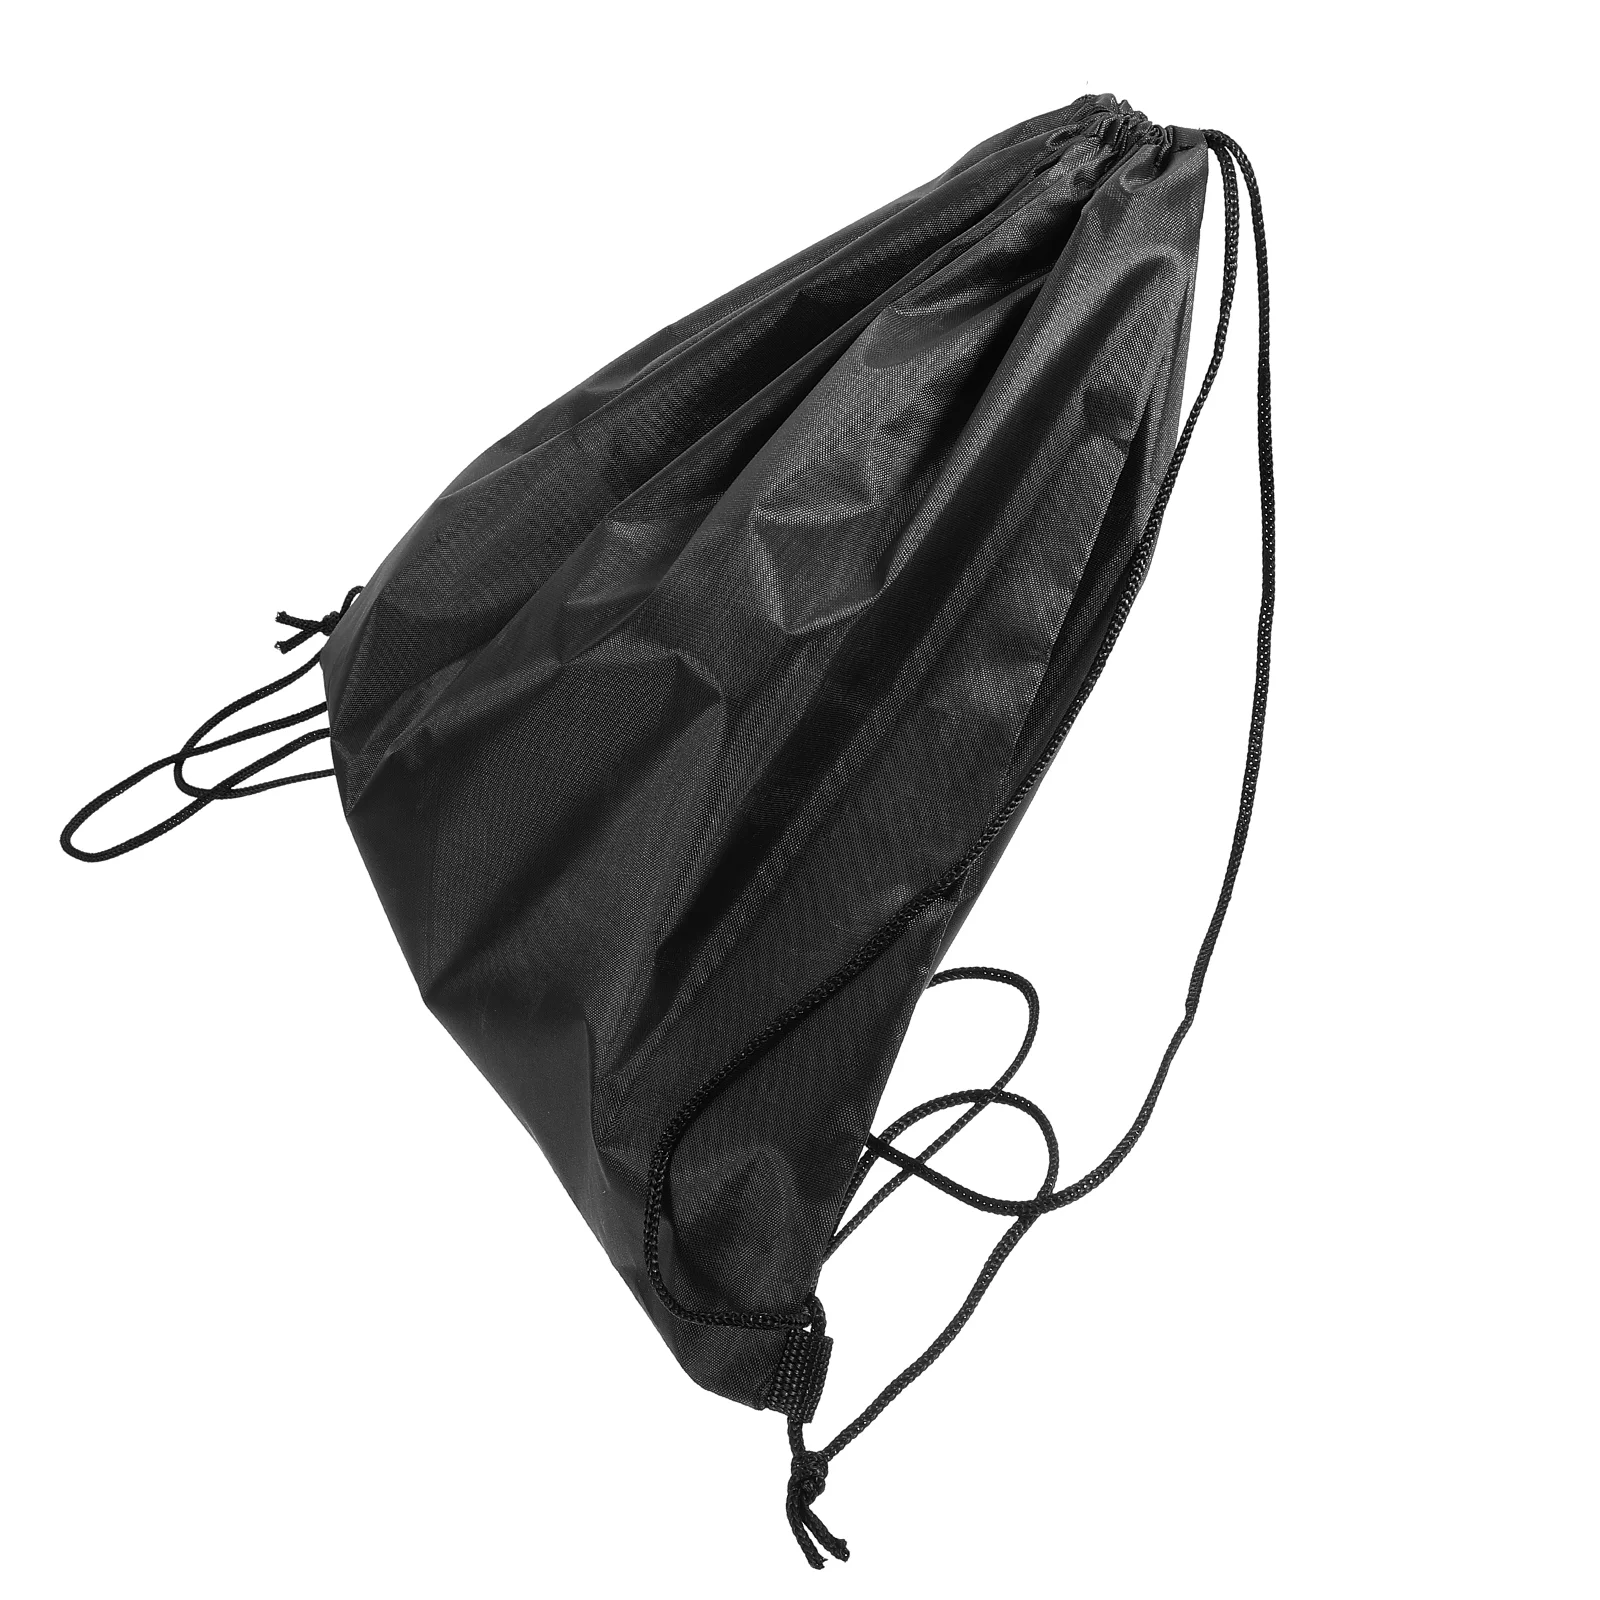 Portable Bag Drawstring Pouch Outdoor Motorcycle Storage Bag portable golf ball storage bag pu leather golf ball carrying pouch container waist bag holder outdoor sports golf accessories